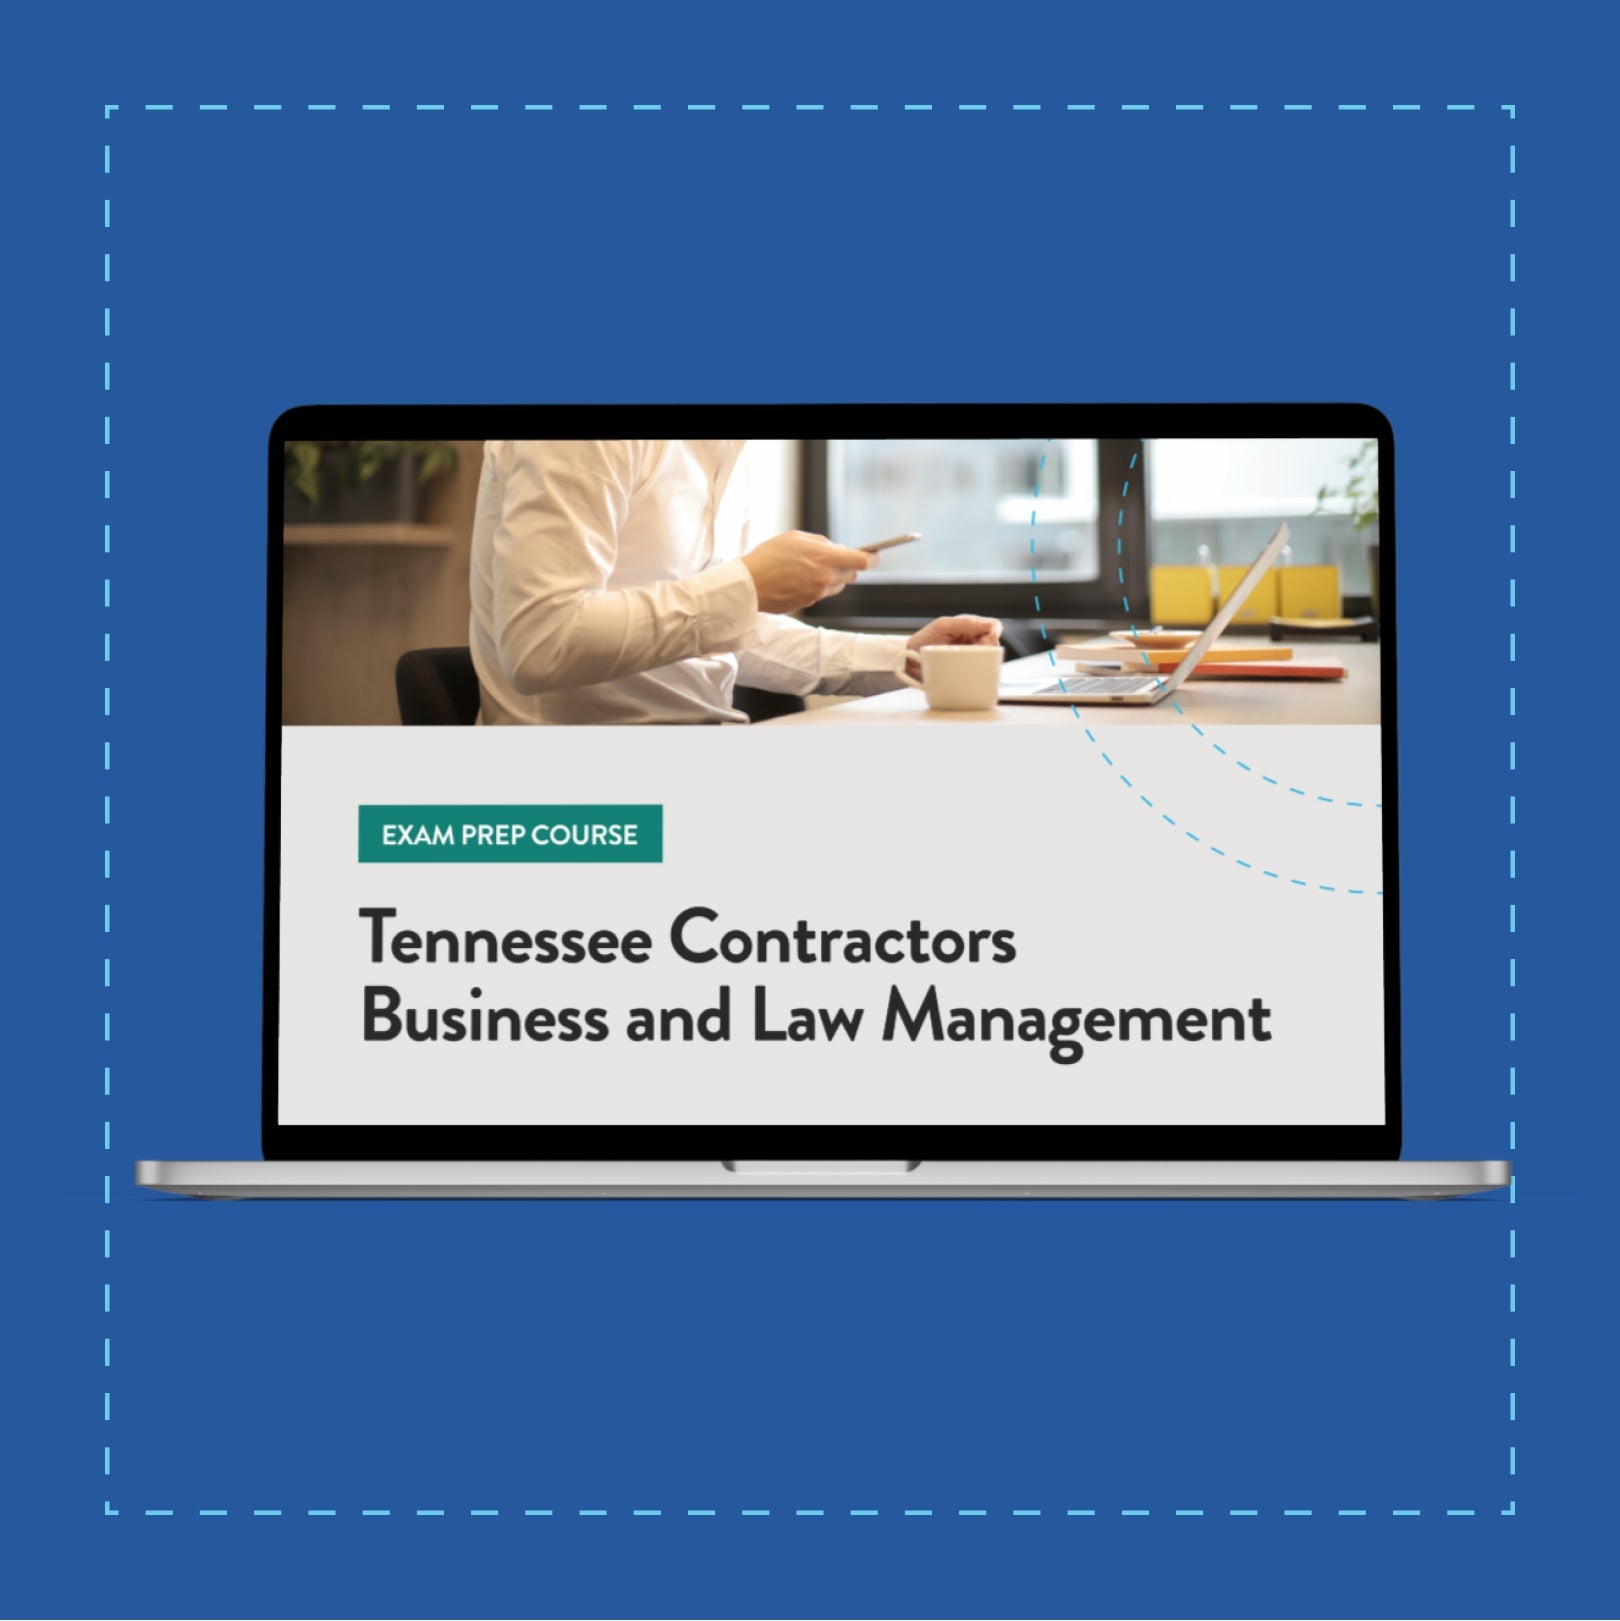 Tennessee Contractors Business and Law Management Exam Prep Course